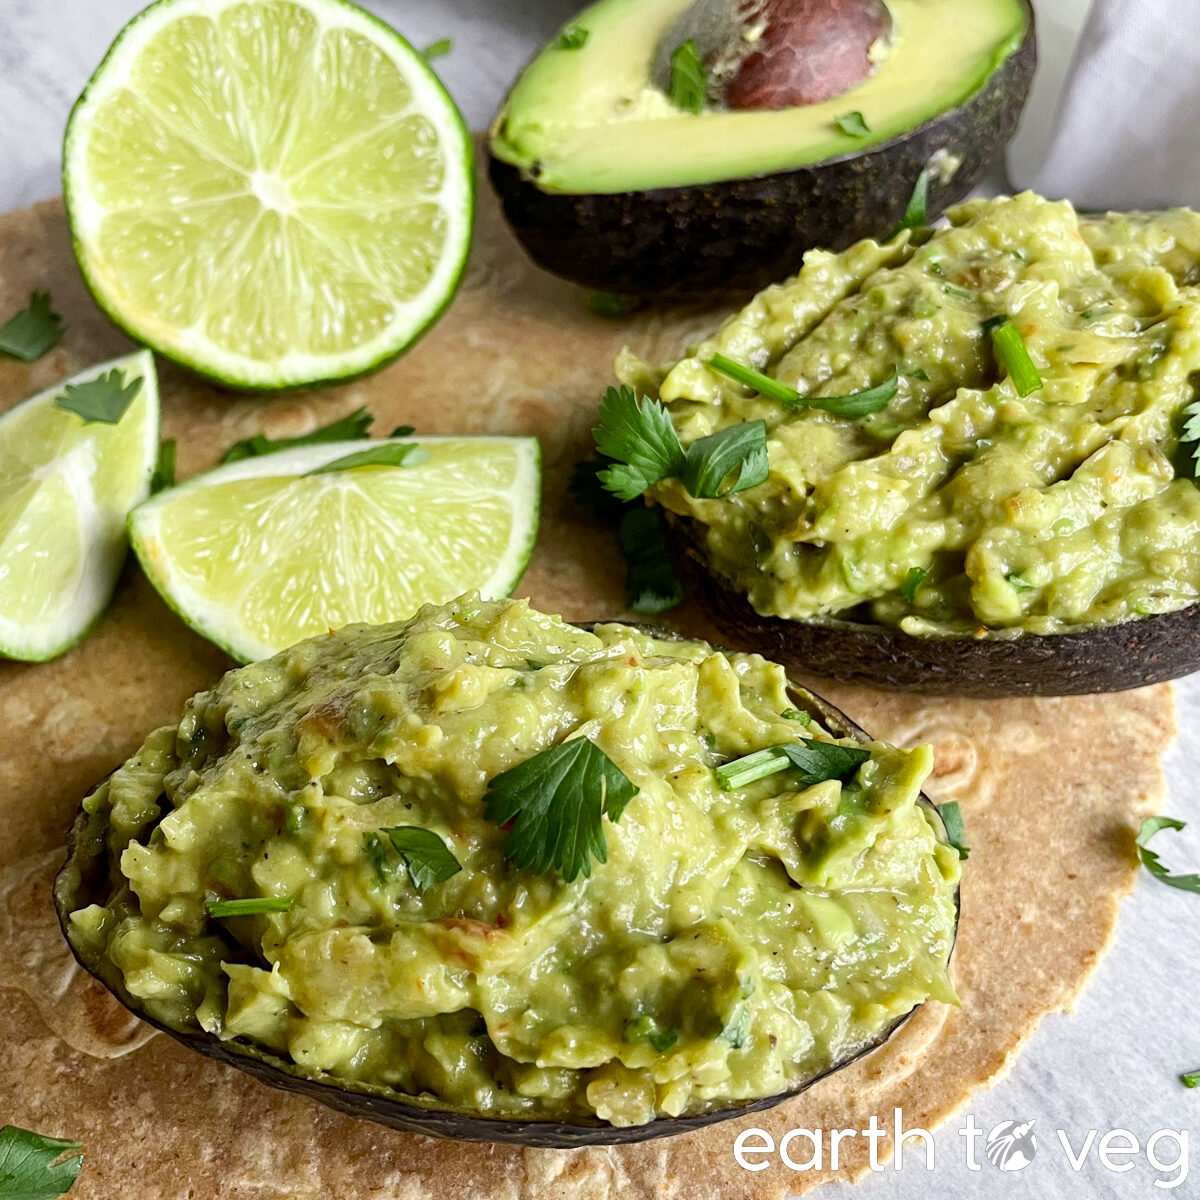 two avocado halves are filled with guacamole, with limes in the background.